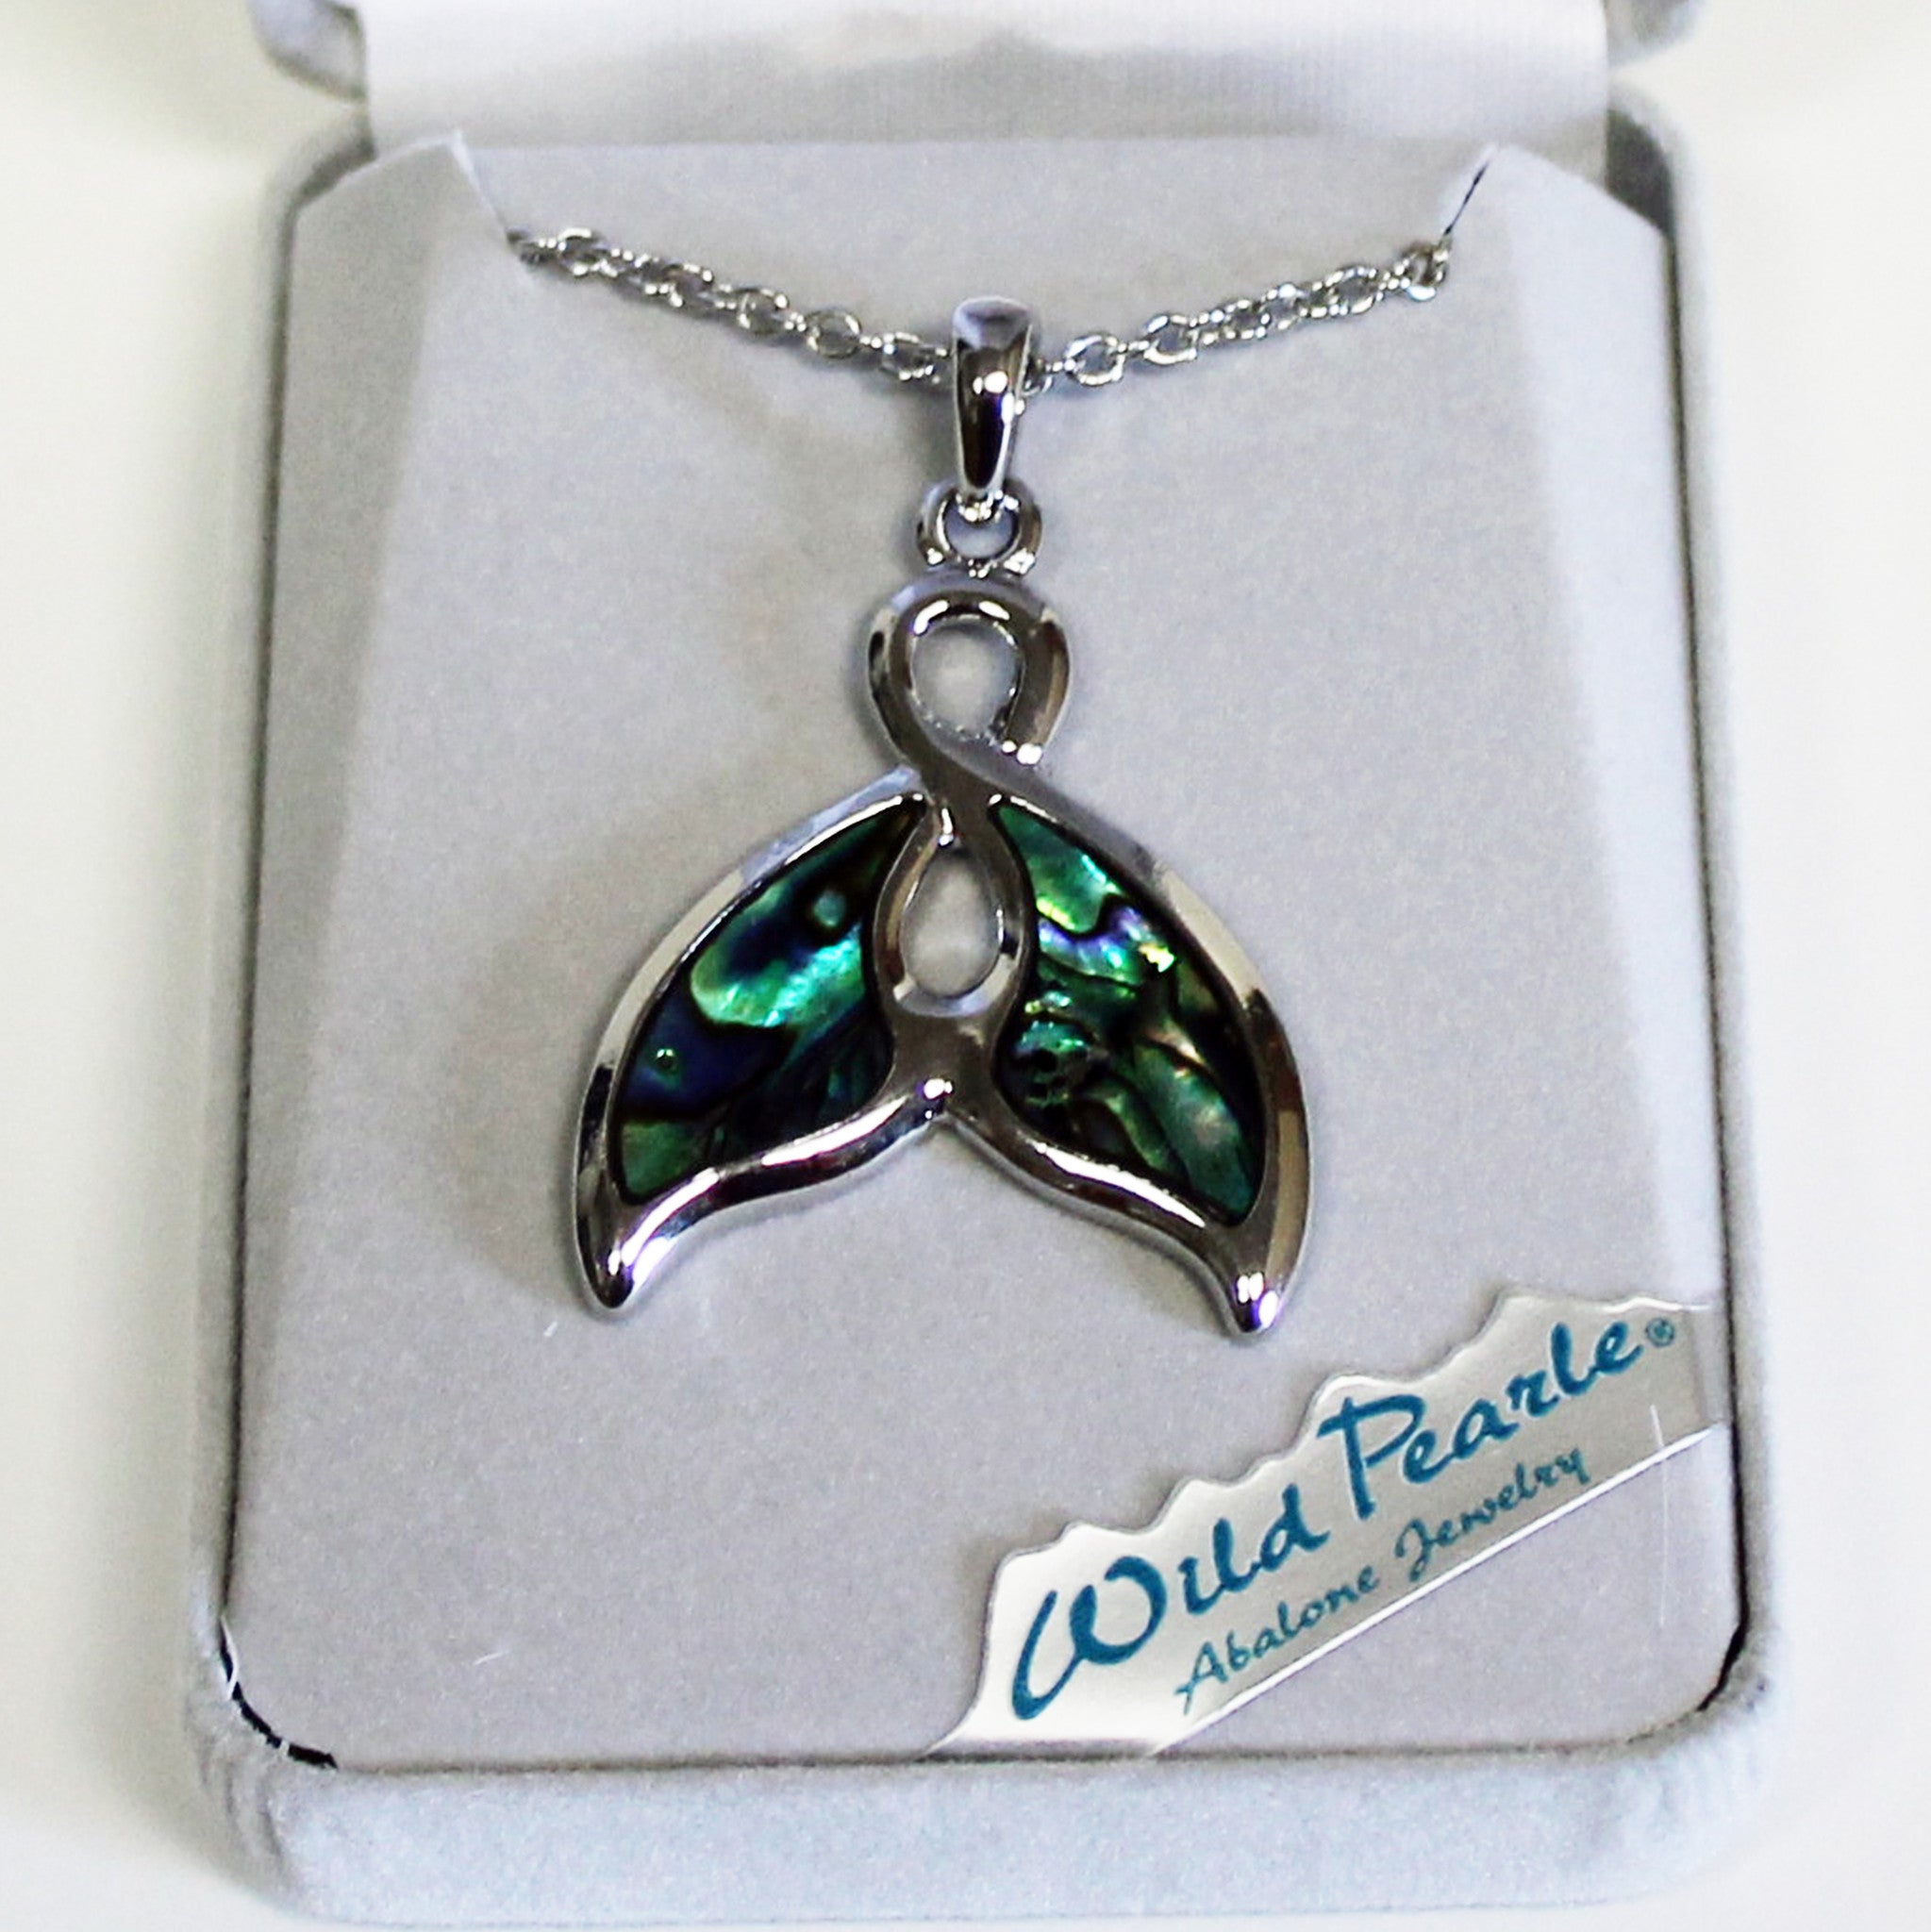 Wild Pearle Whale Tail Necklace